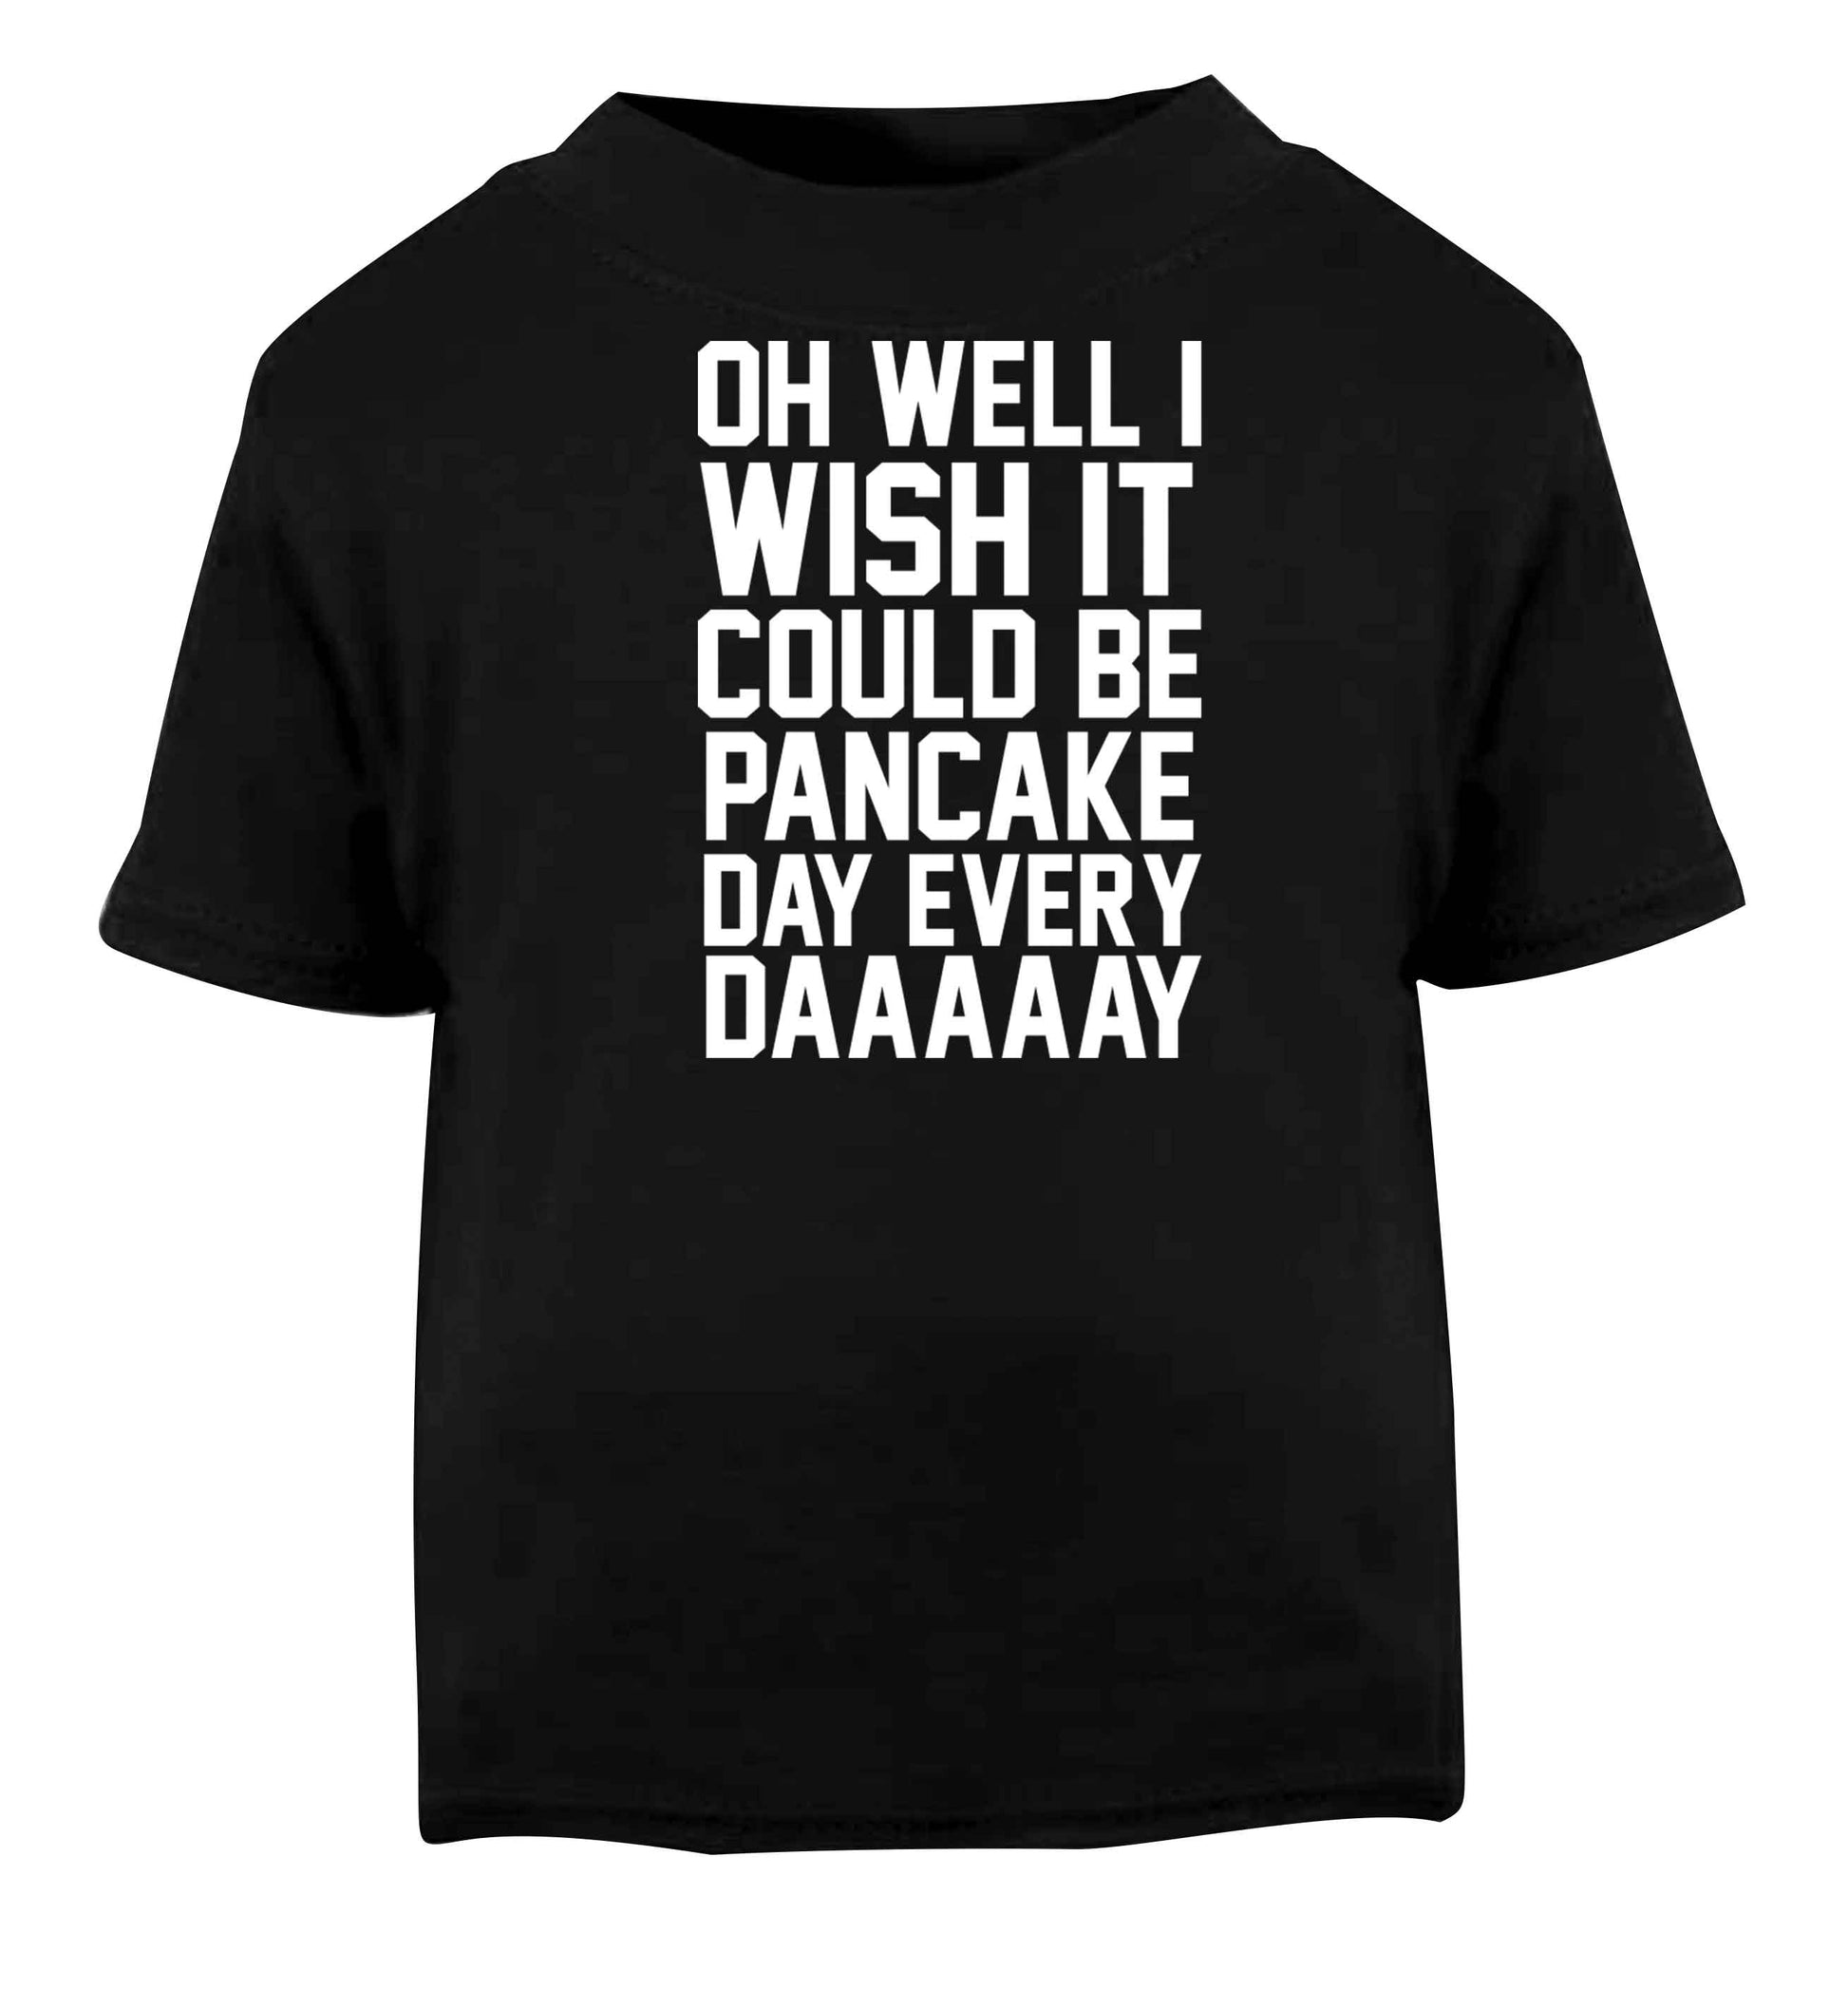 Oh well I wish it could be pancake day every day Black baby toddler Tshirt 2 years